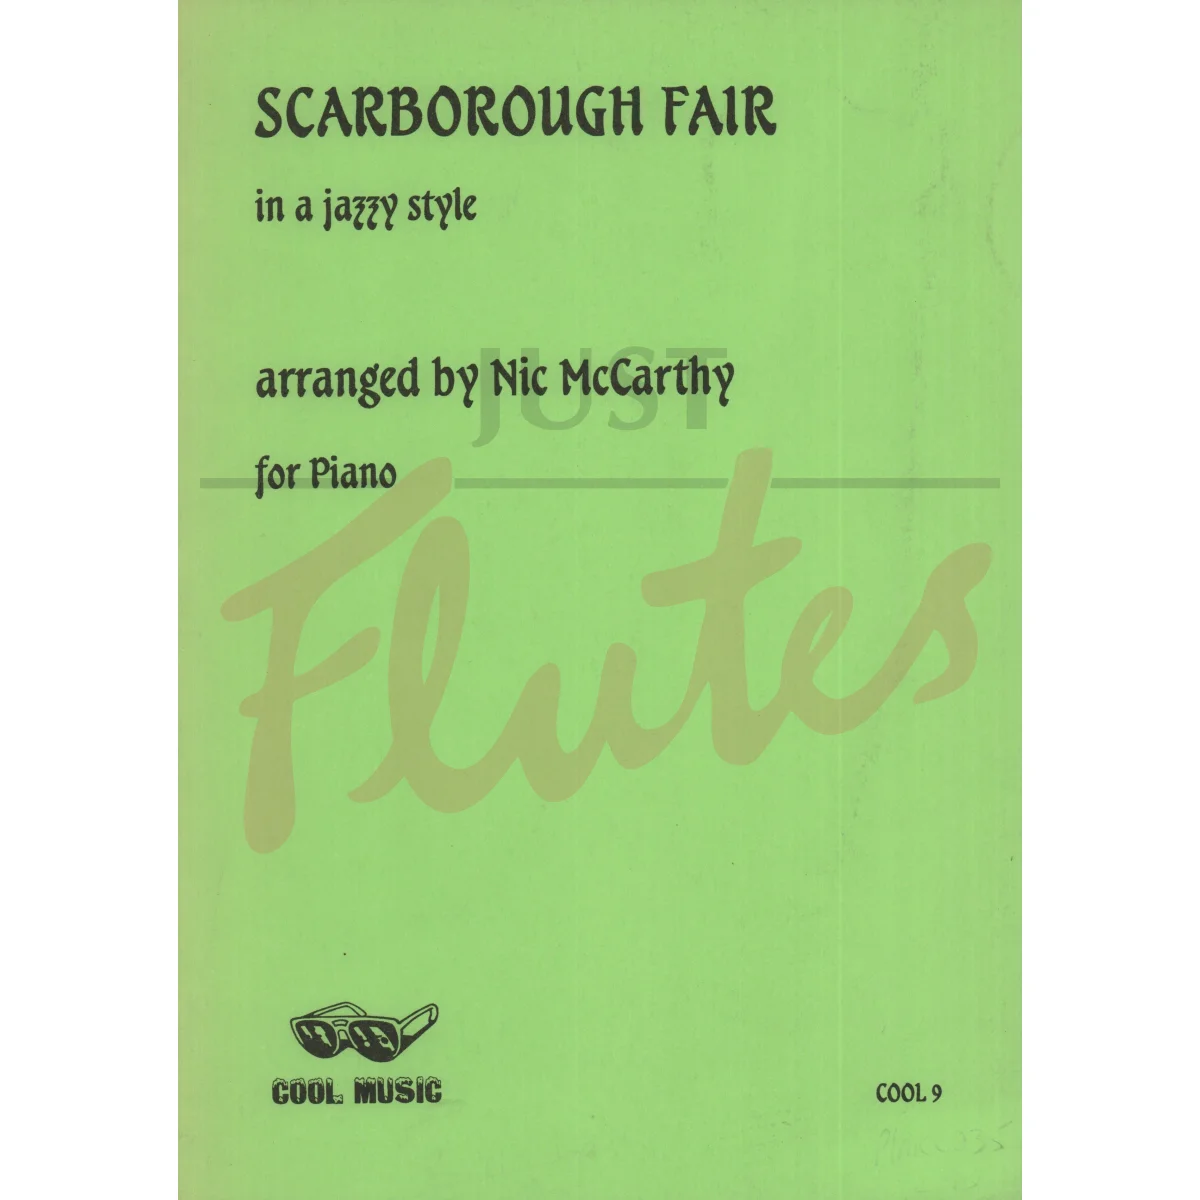 Scarborough Fair in a Jazzy Style for Piano